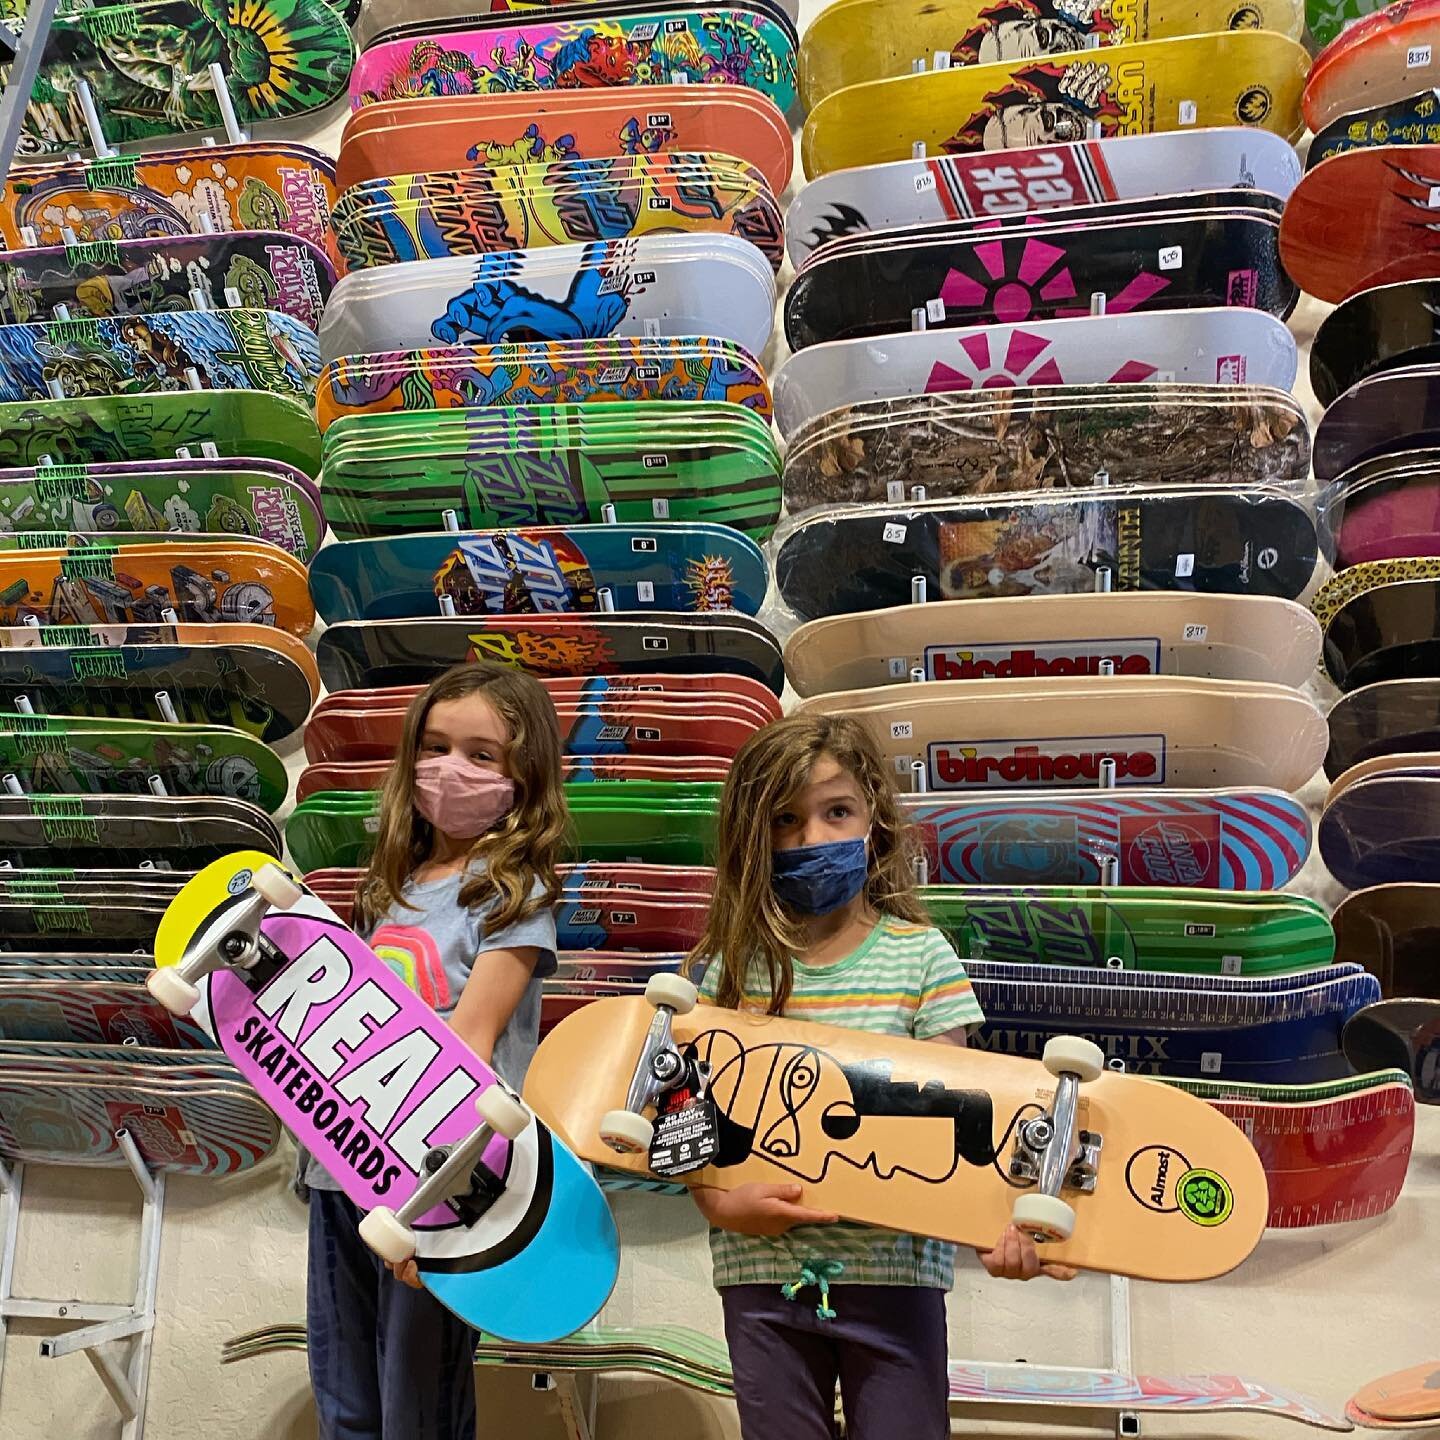 Shred ready sisters. ❤️